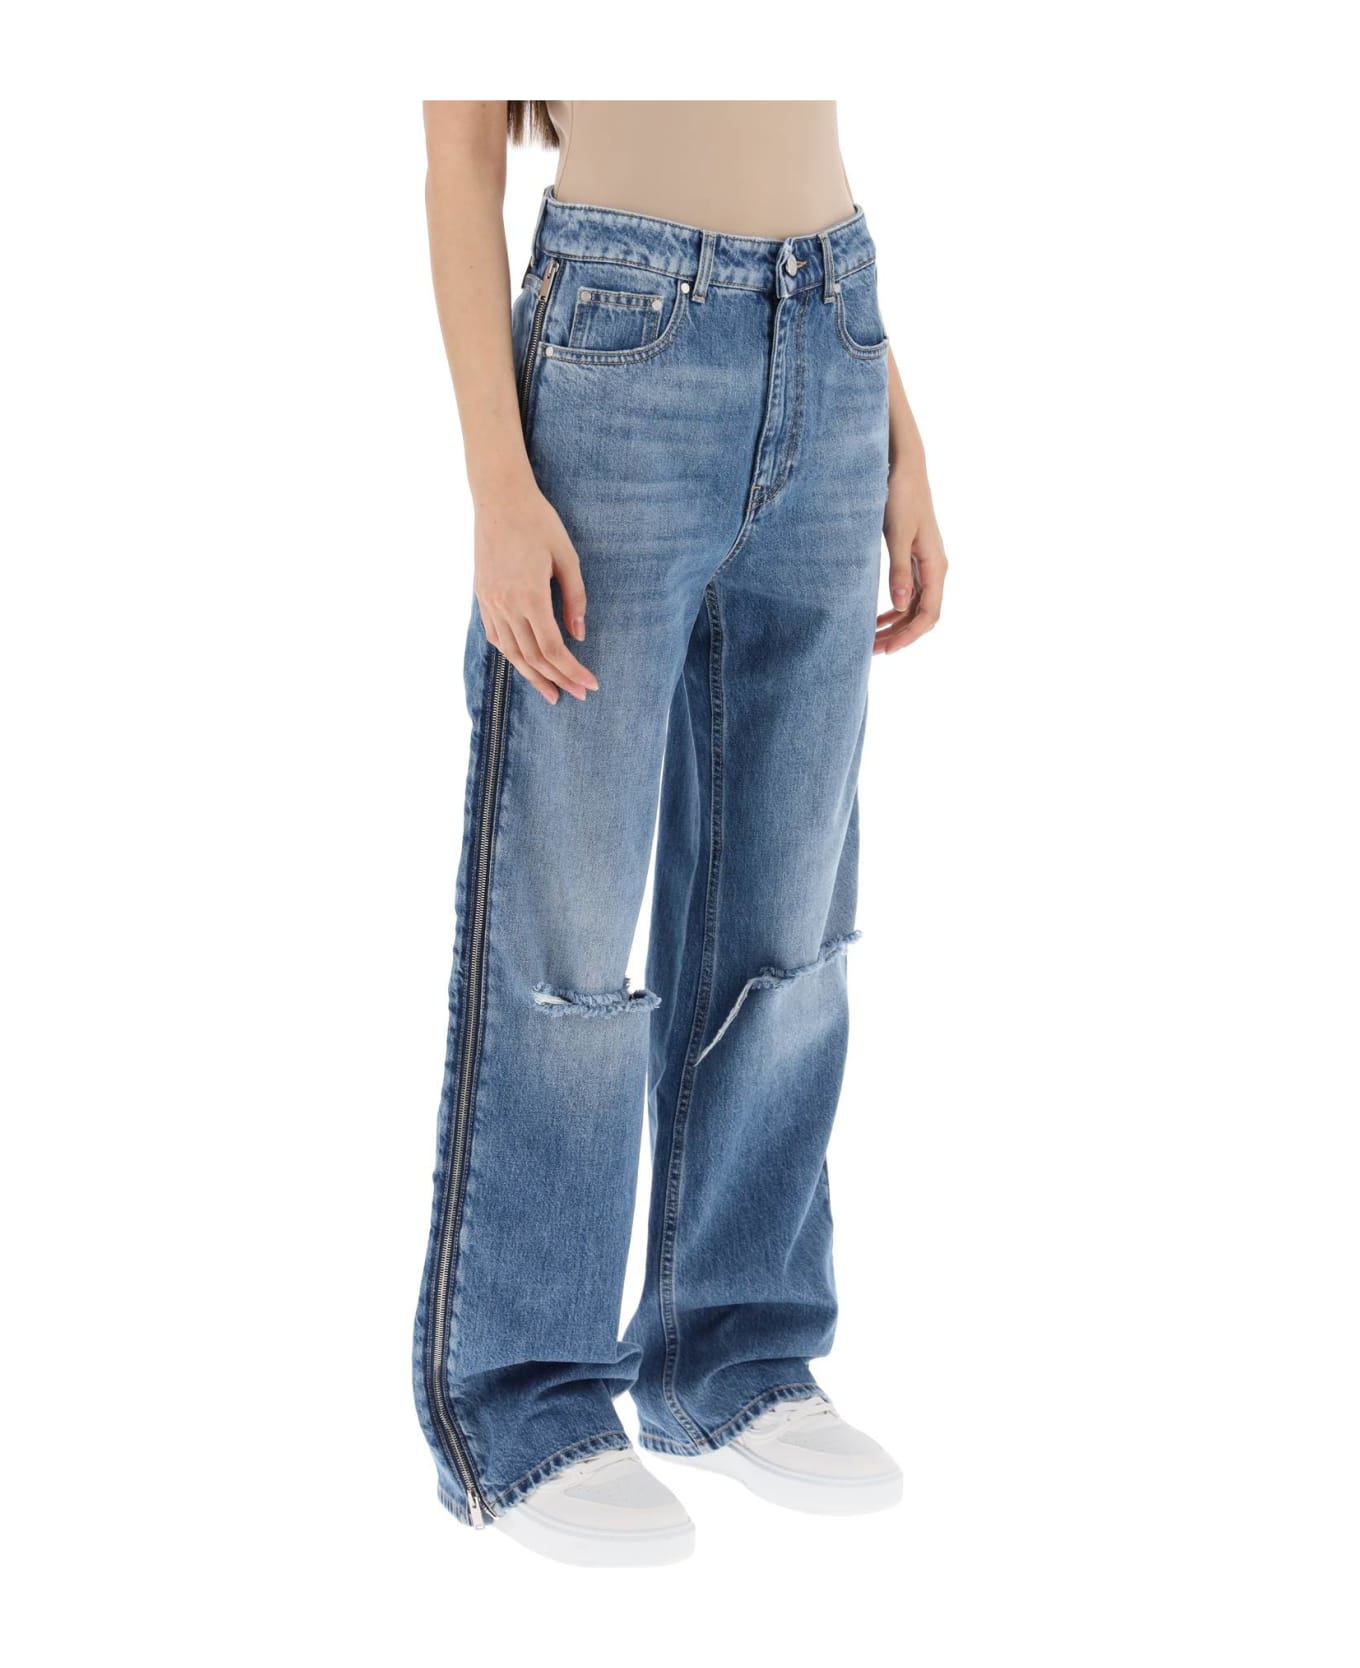 Stella McCartney Straight Leg Jeans With Zippers - MID BLUE (Blue)